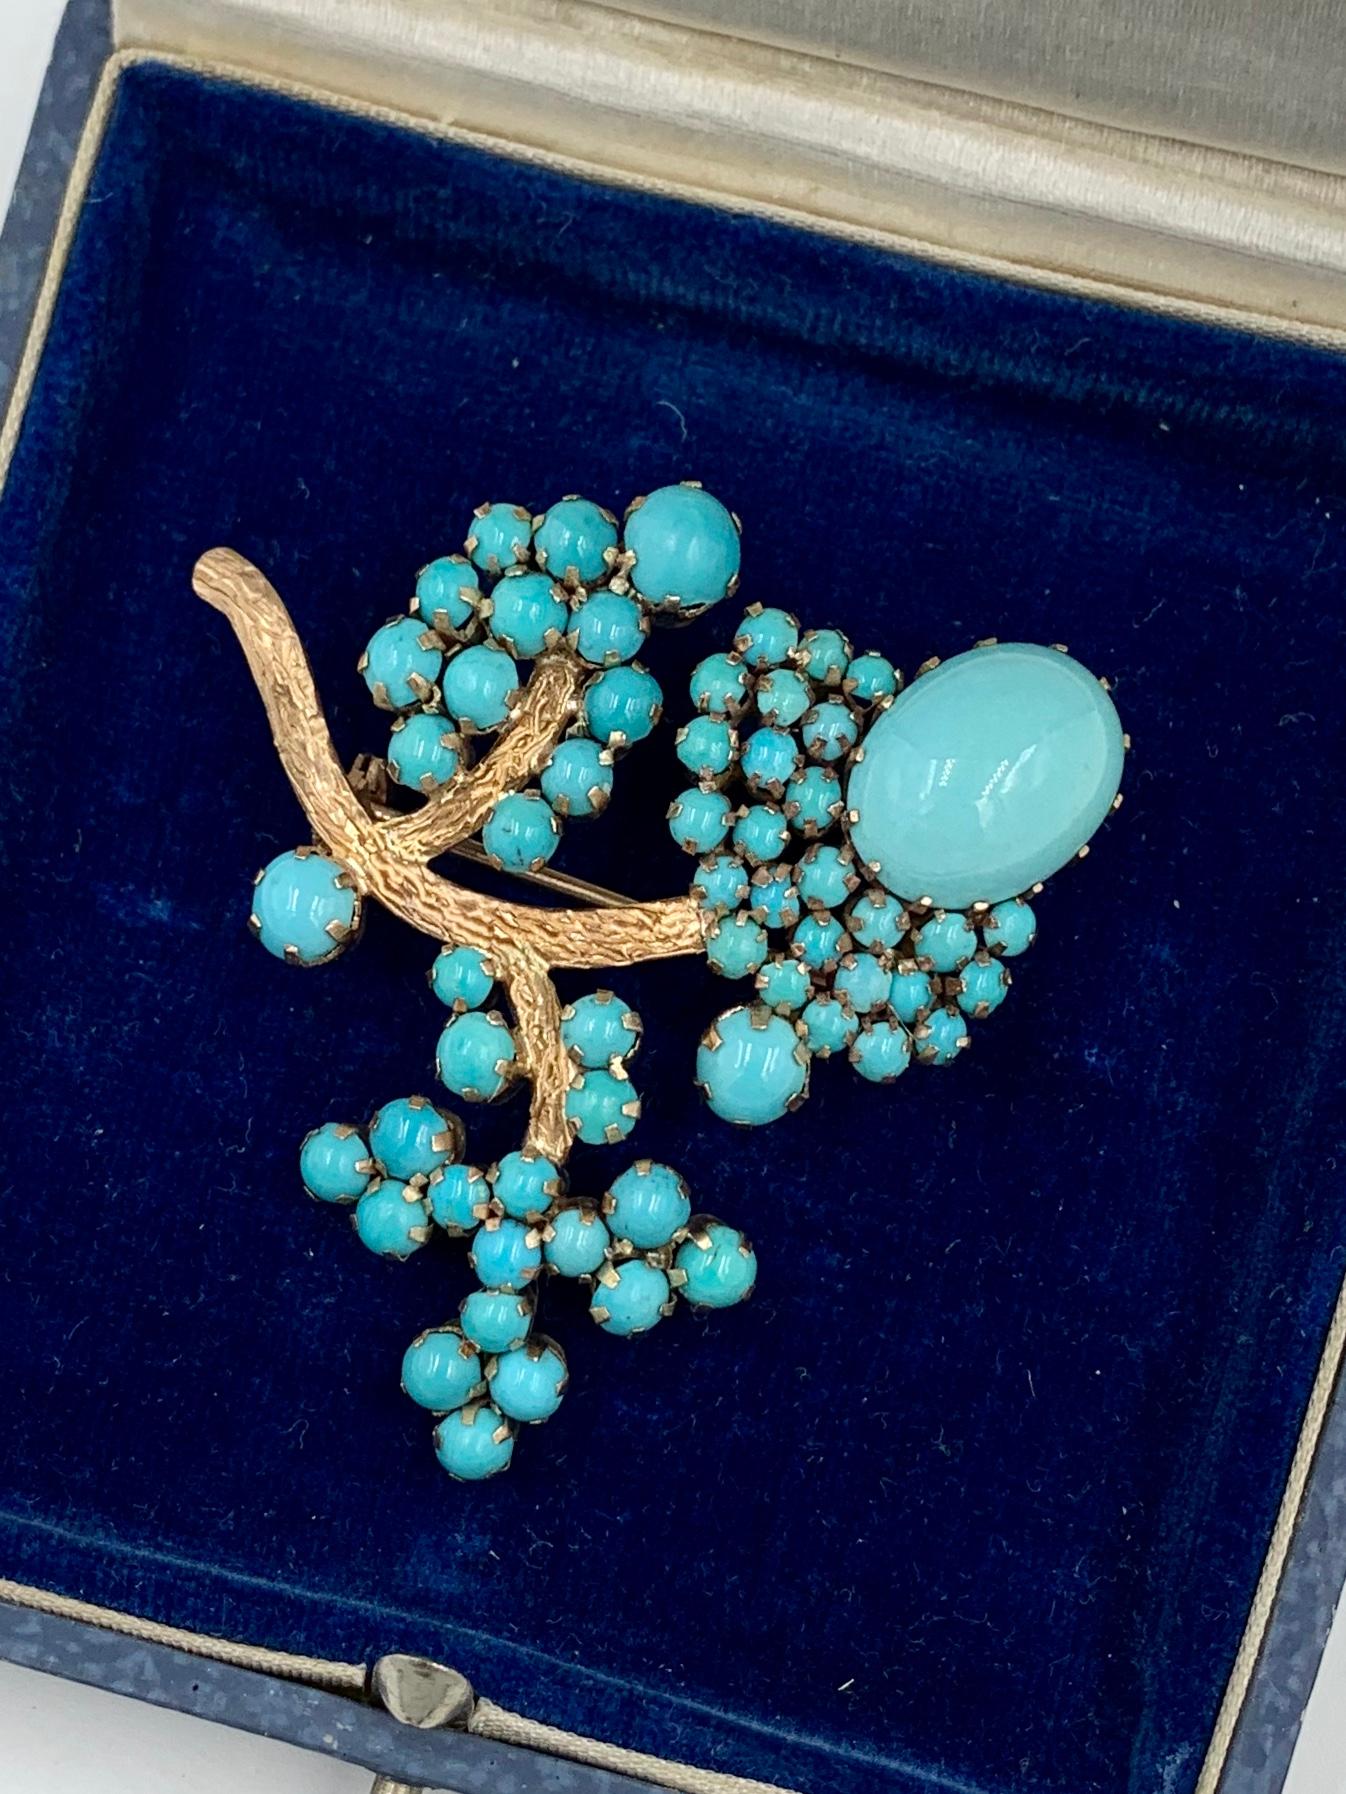 A flower motif brooch with gorgeous Persian Turquoise of great beauty.  The abundance of Persian Turquoise Cabochons are of the highest quality with superb color uniformity.  The brooch is beautifully made with the myriad of sizes of round and oval